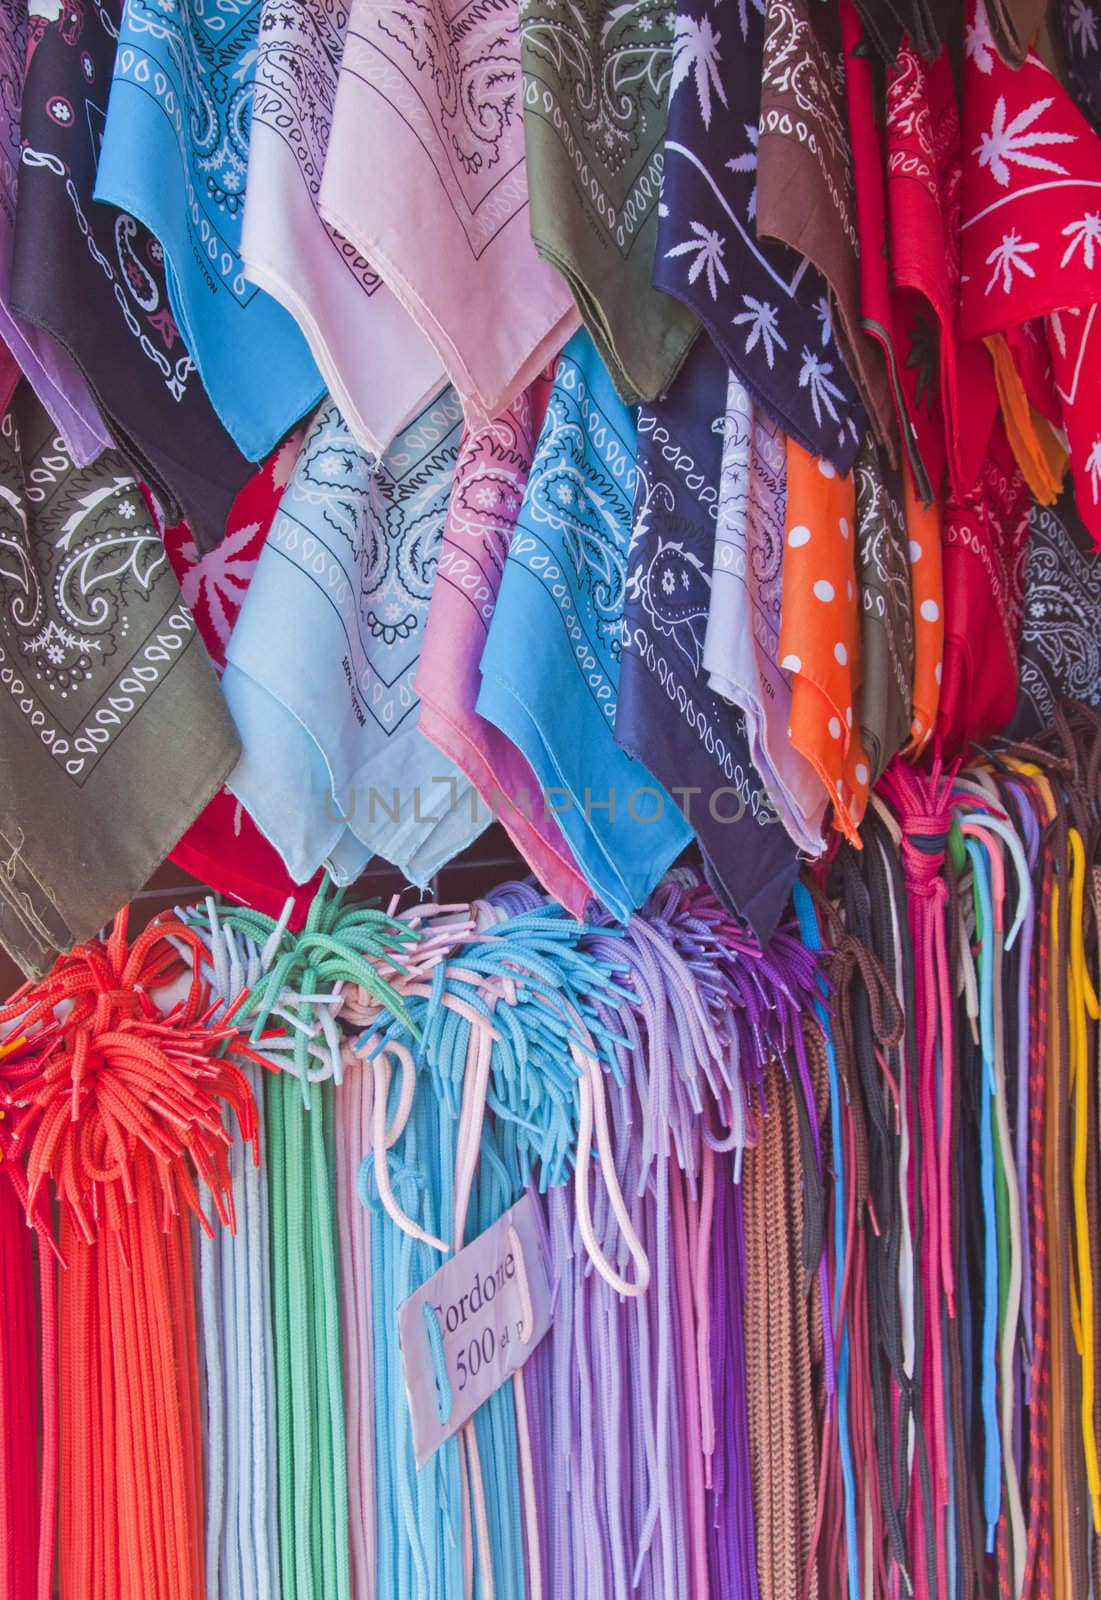 Bandanas & Laces for sale in Pucon, Chile